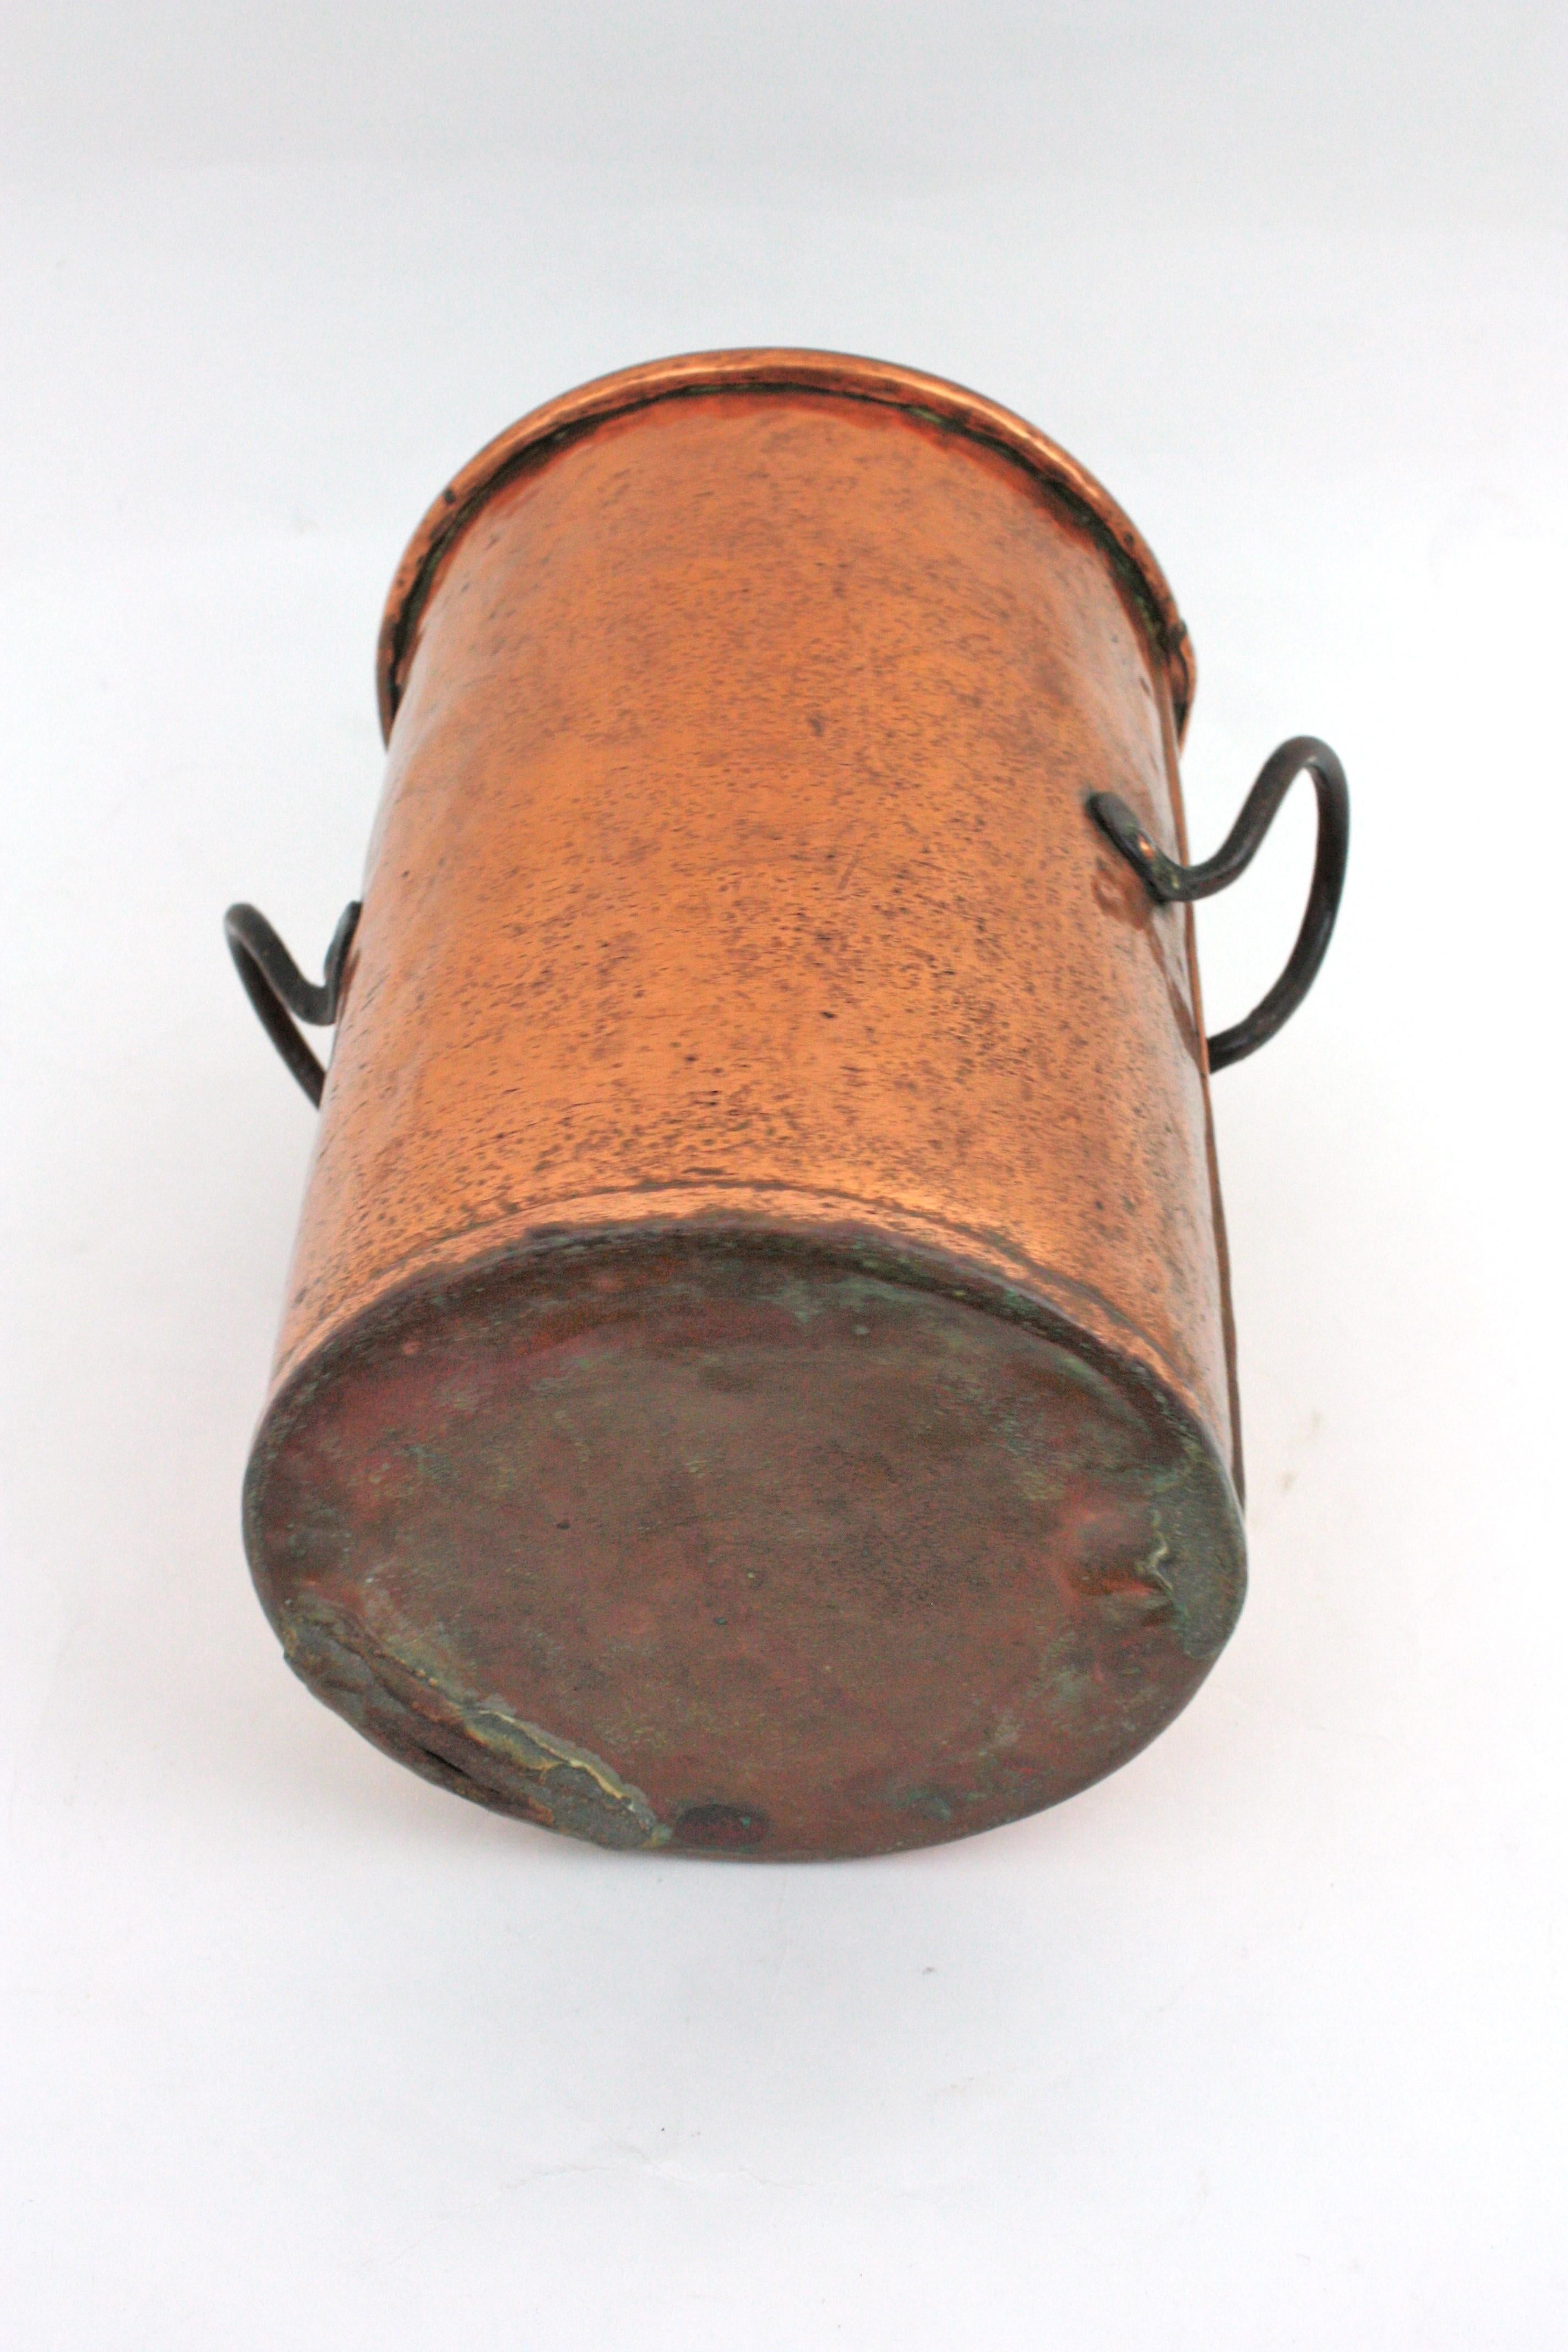 French Copper Tall Cauldron or Planter with Handles  For Sale 9